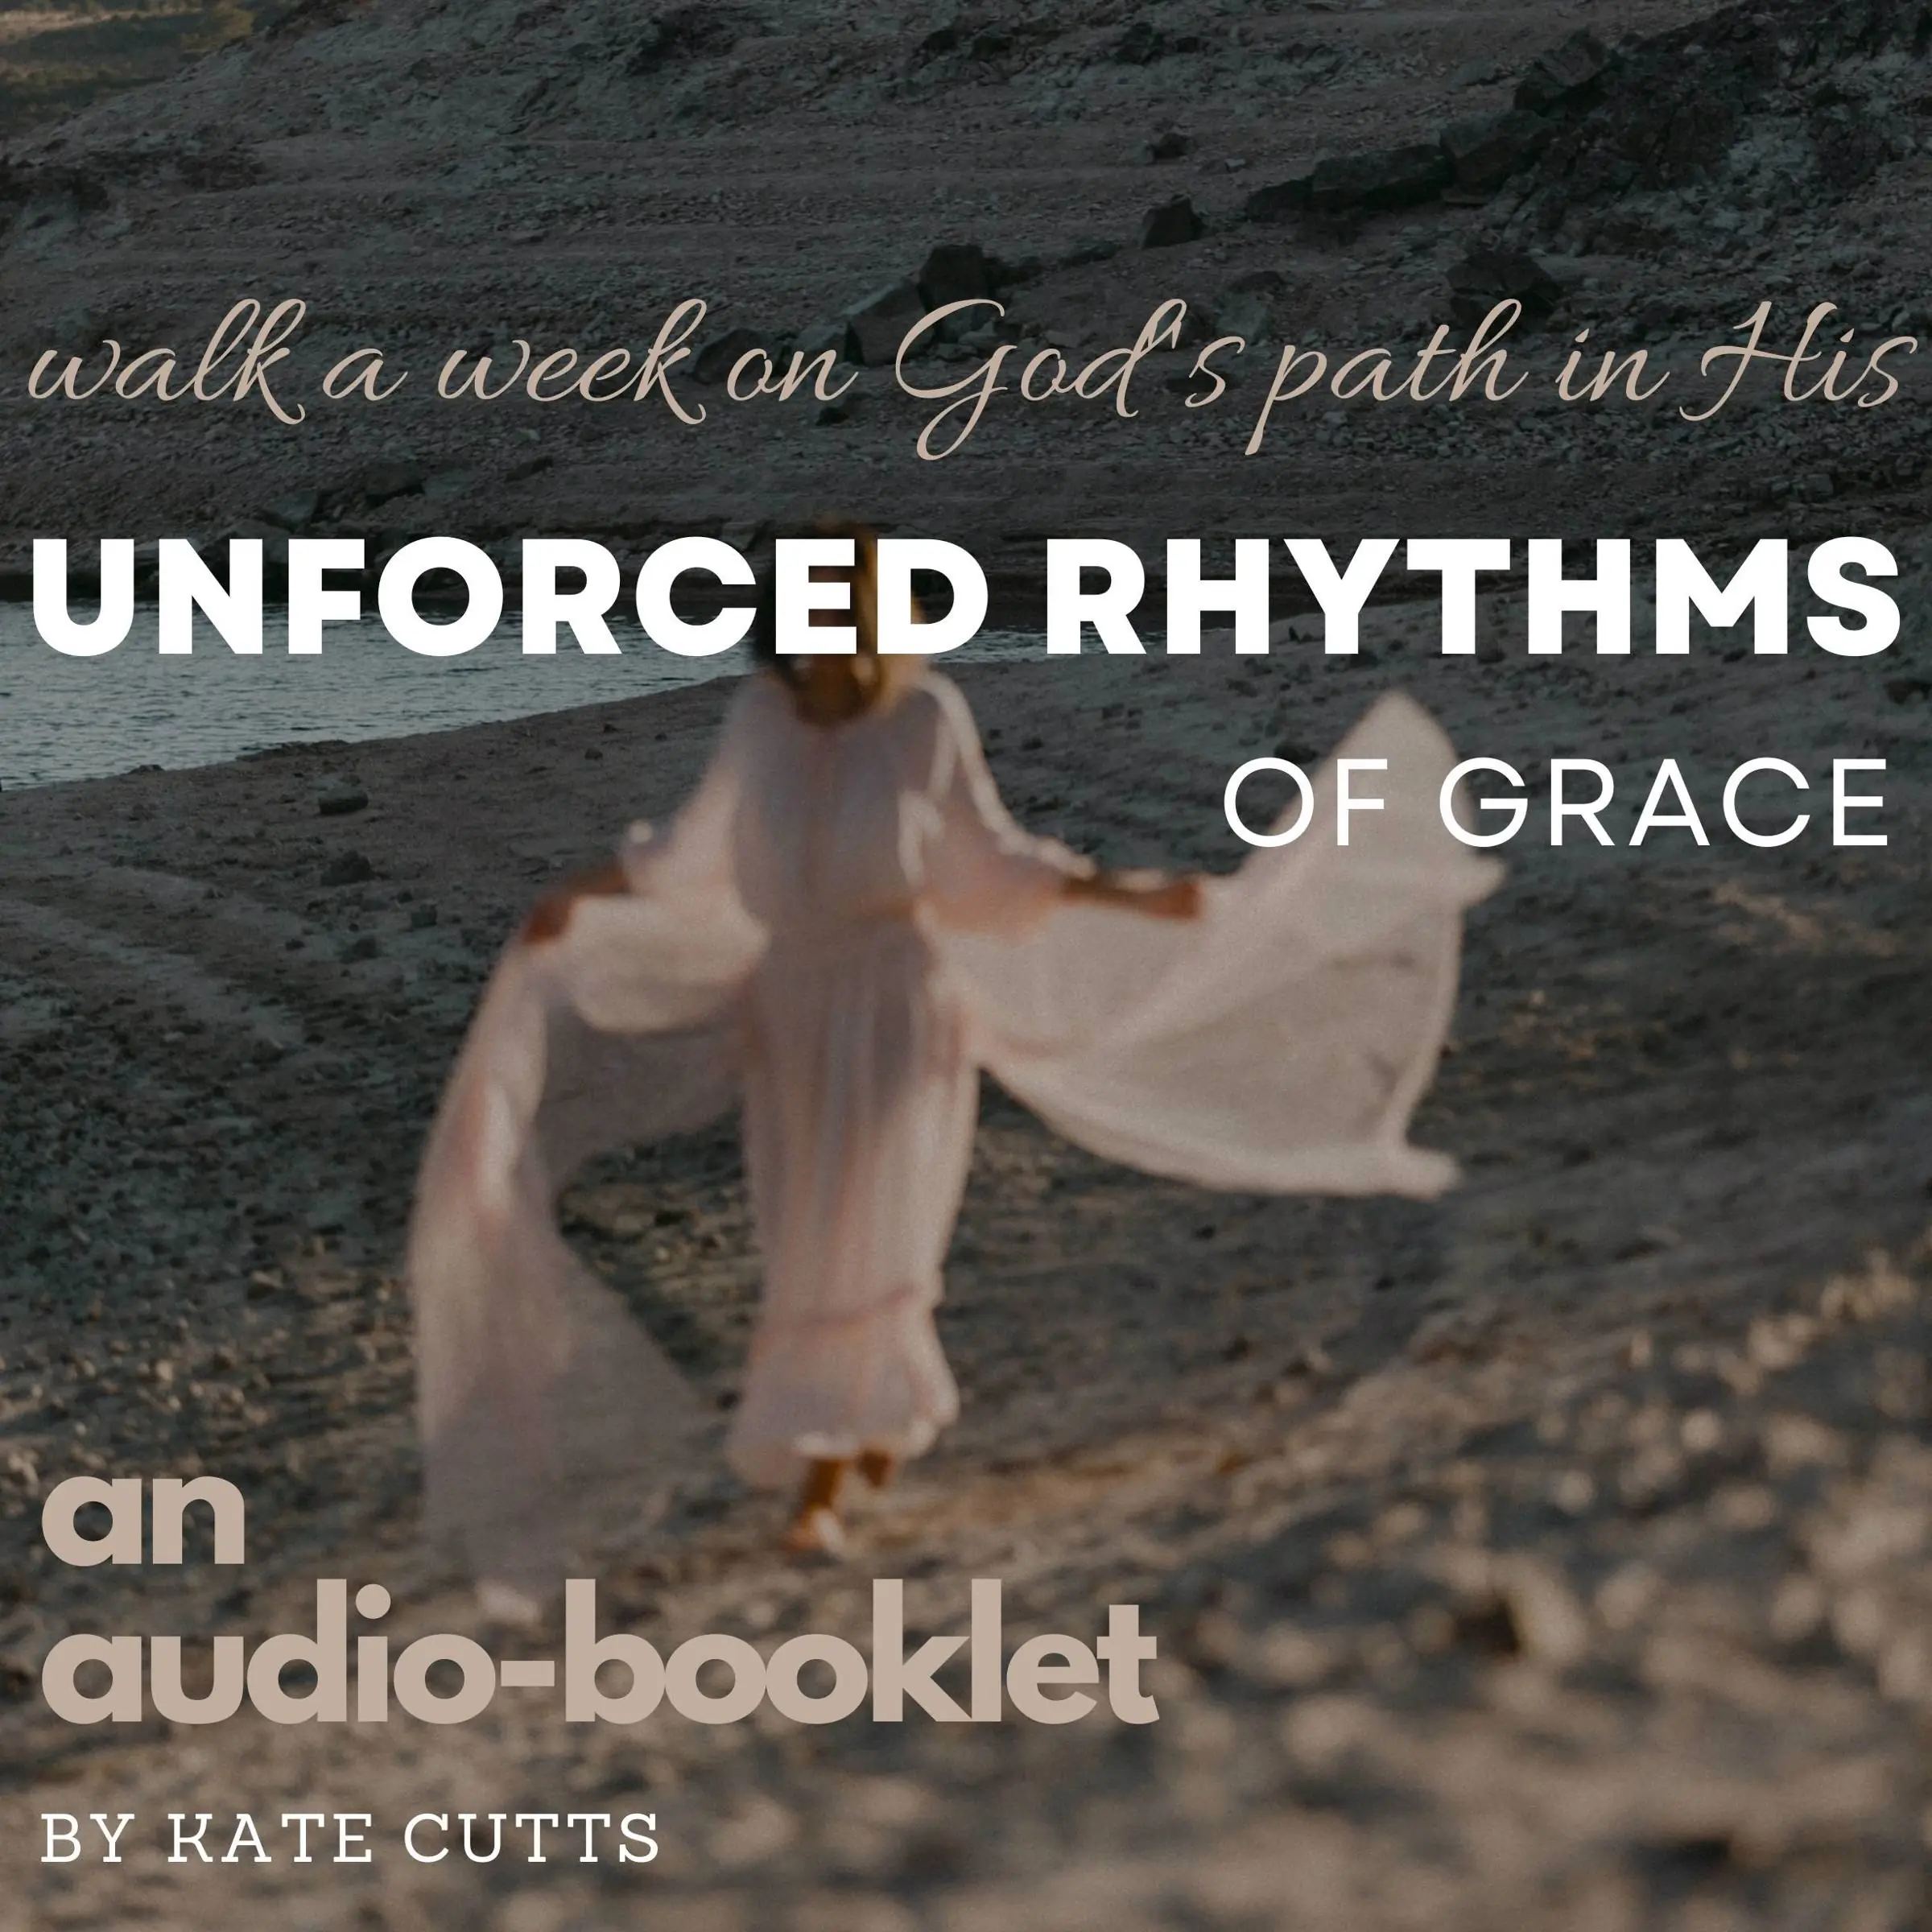 Unforced Rhythms of Grace by Kate Cutts Audiobook